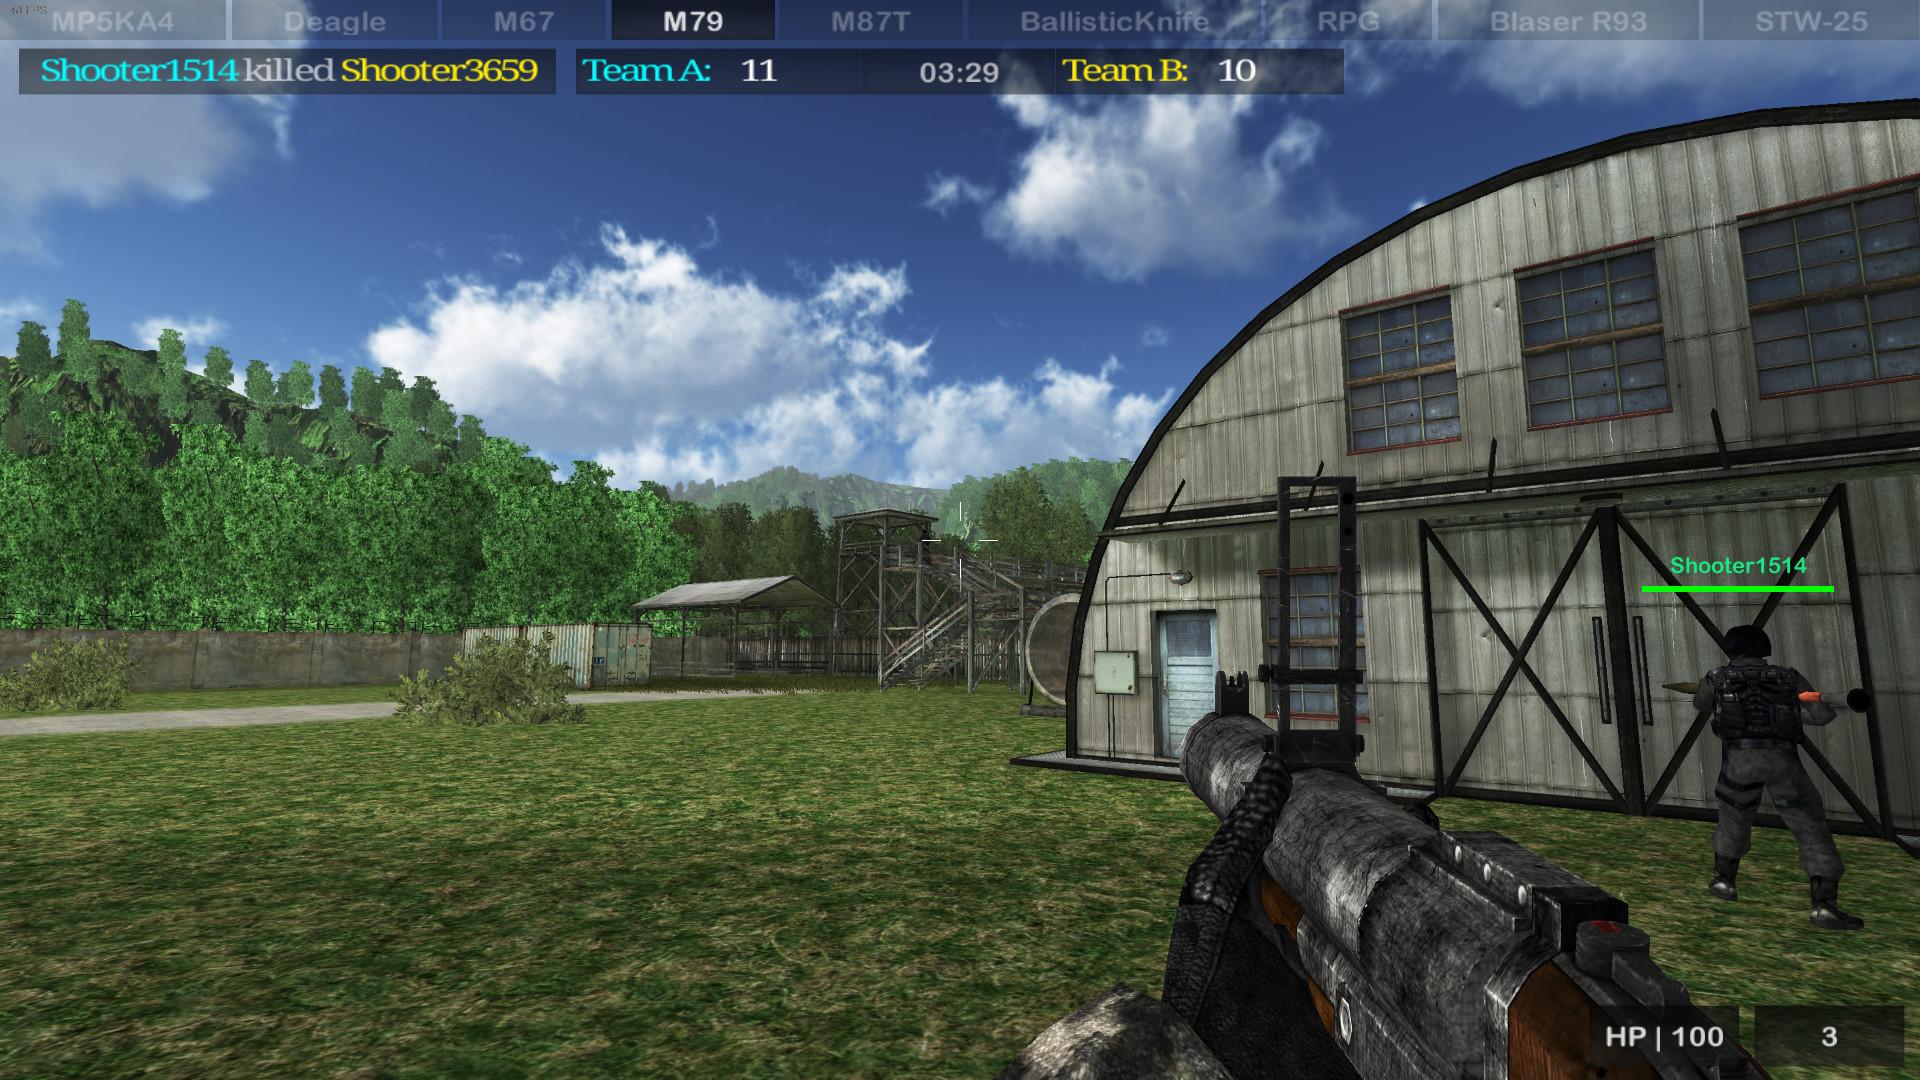 Screenshot №1 from game Masked Shooters 2